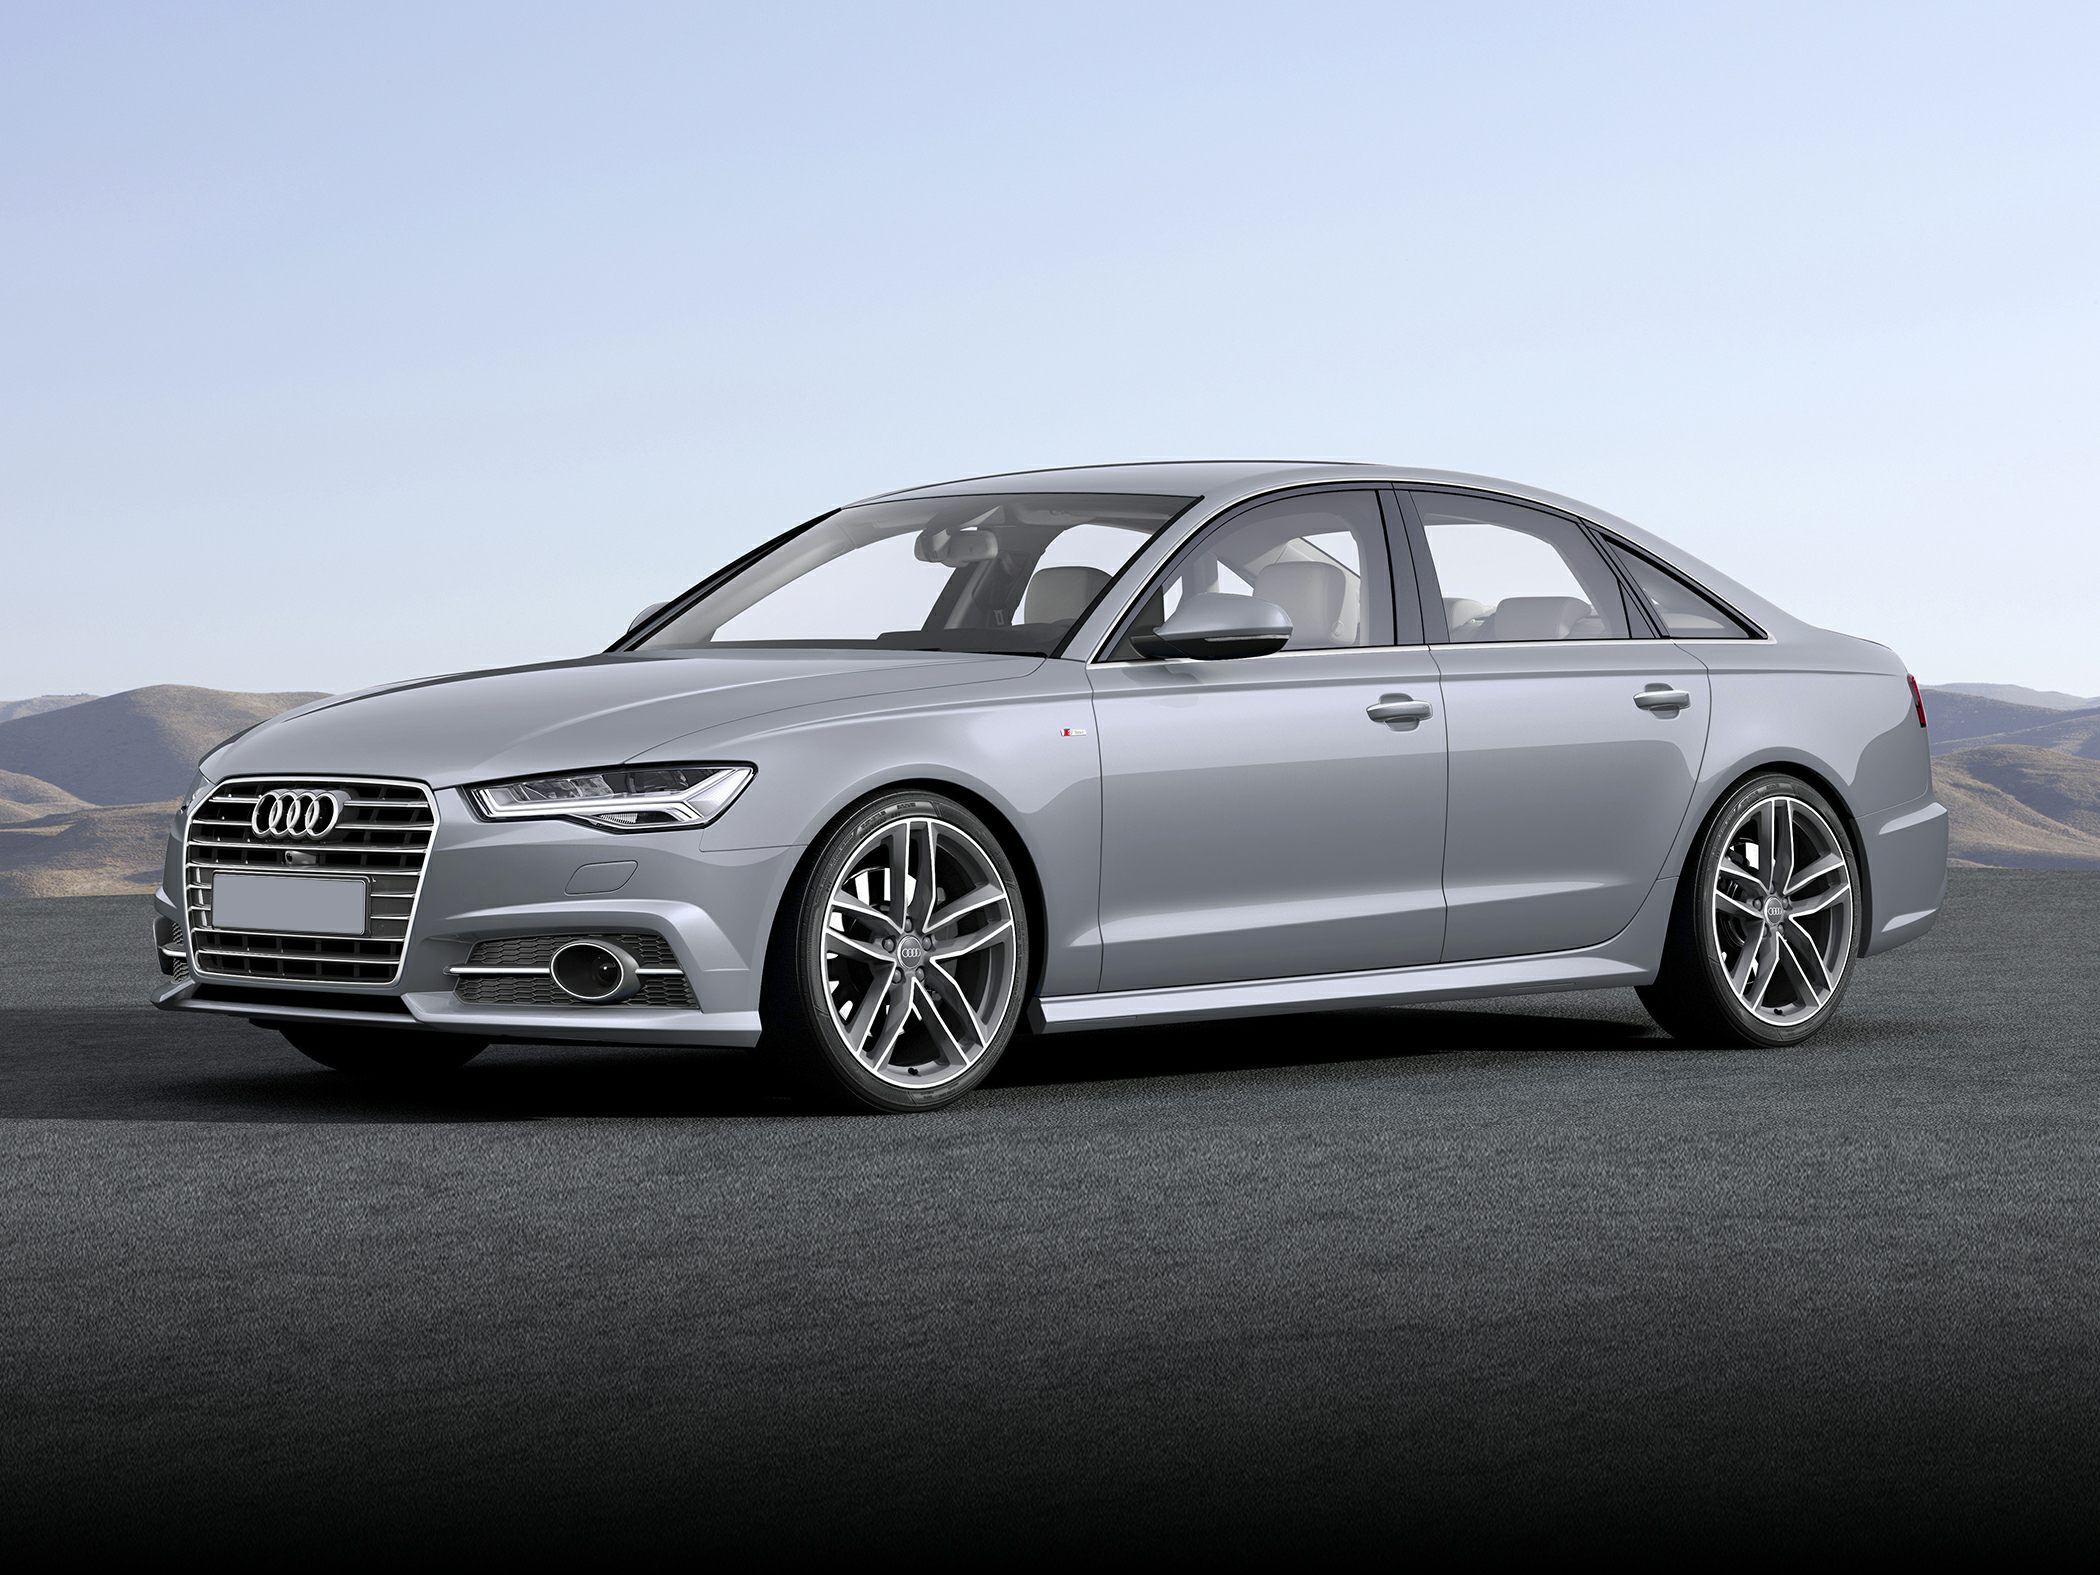 2017 Audi A6 Deals, Prices, Incentives & Leases, Overview - CarsDirect